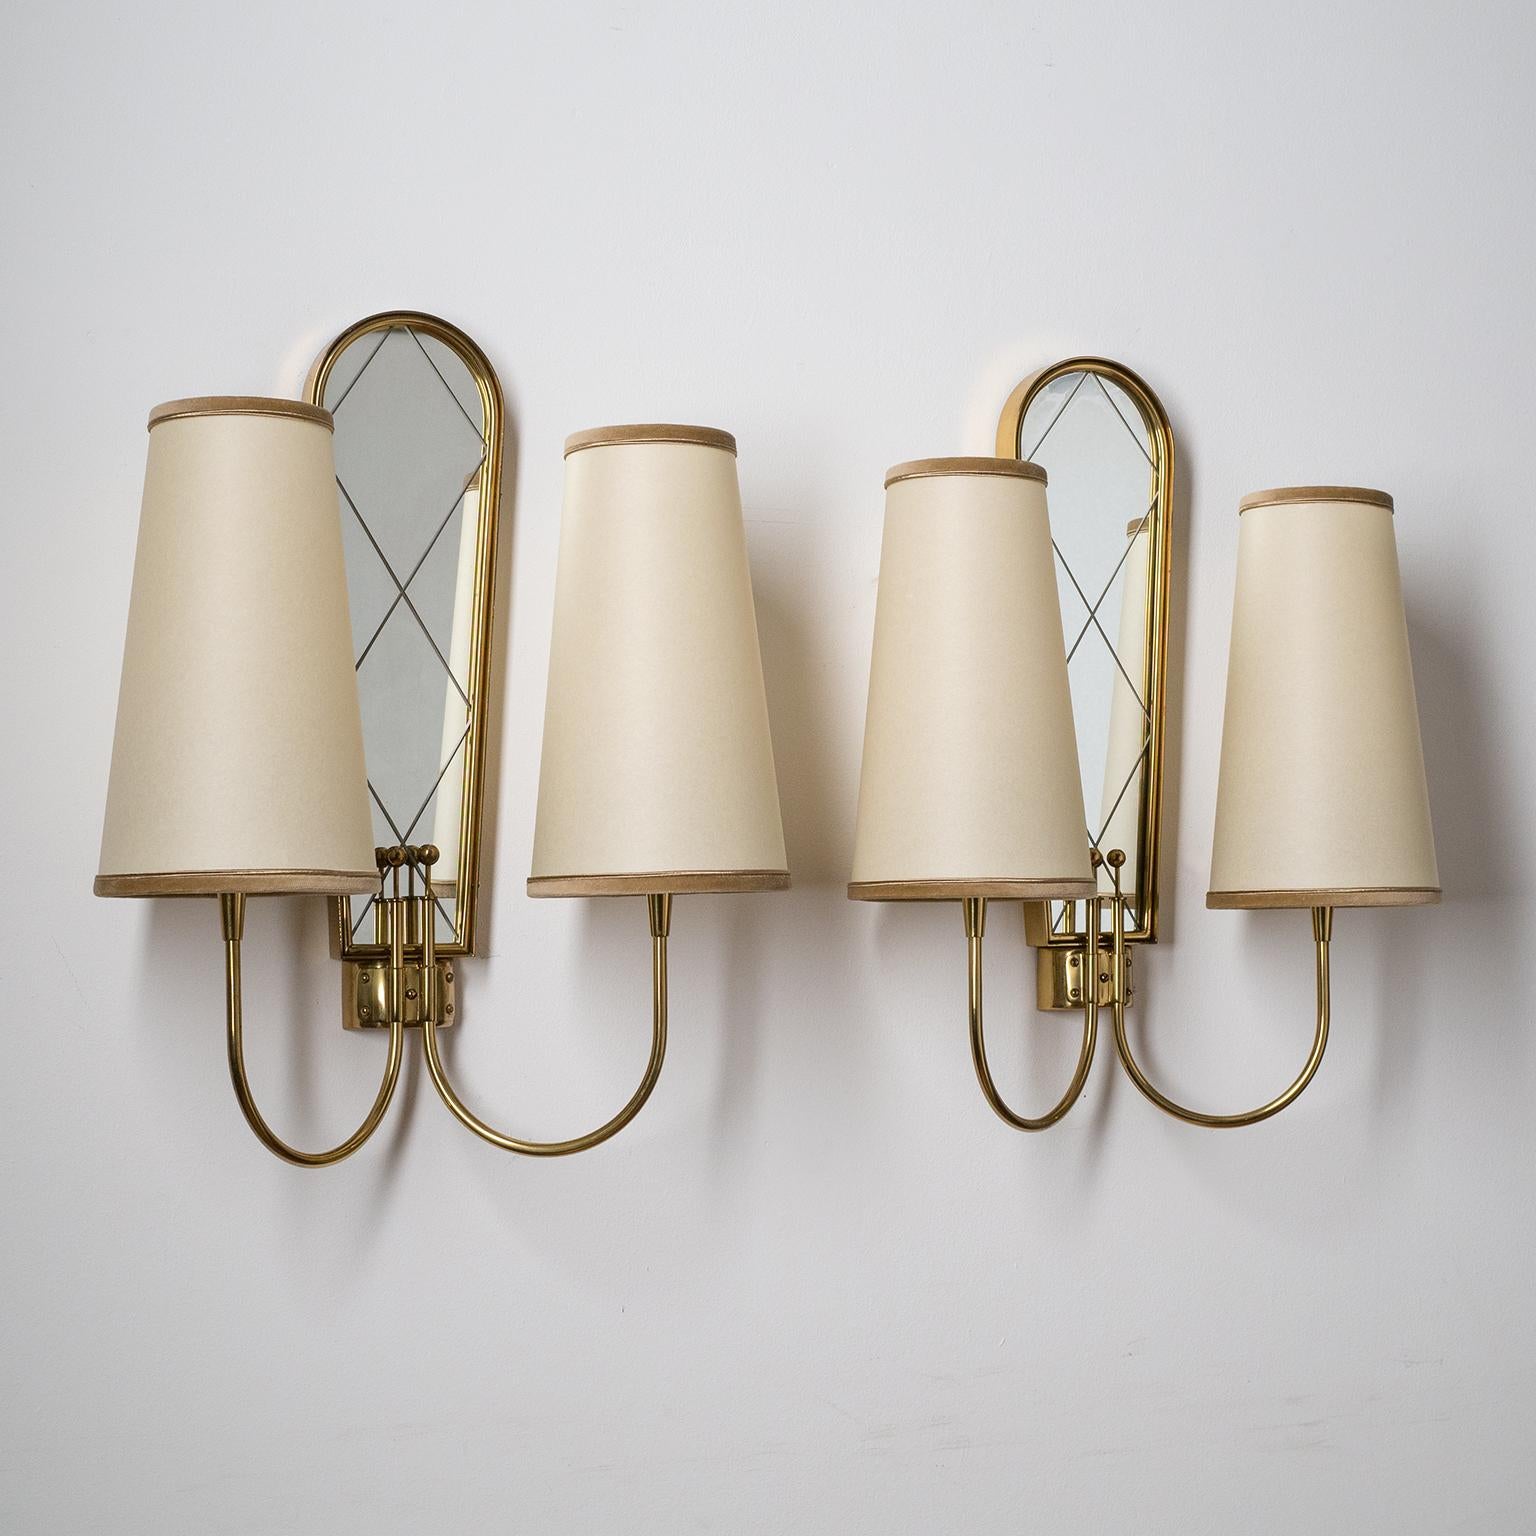 Rare pair of large dual-arm brass wall lights from the 1940s. Brass hardware with a mirror centerpiece. Each arm has a frosted glass disc which sits under the socket and on to which the shades are placed. Good original condition with some patina on